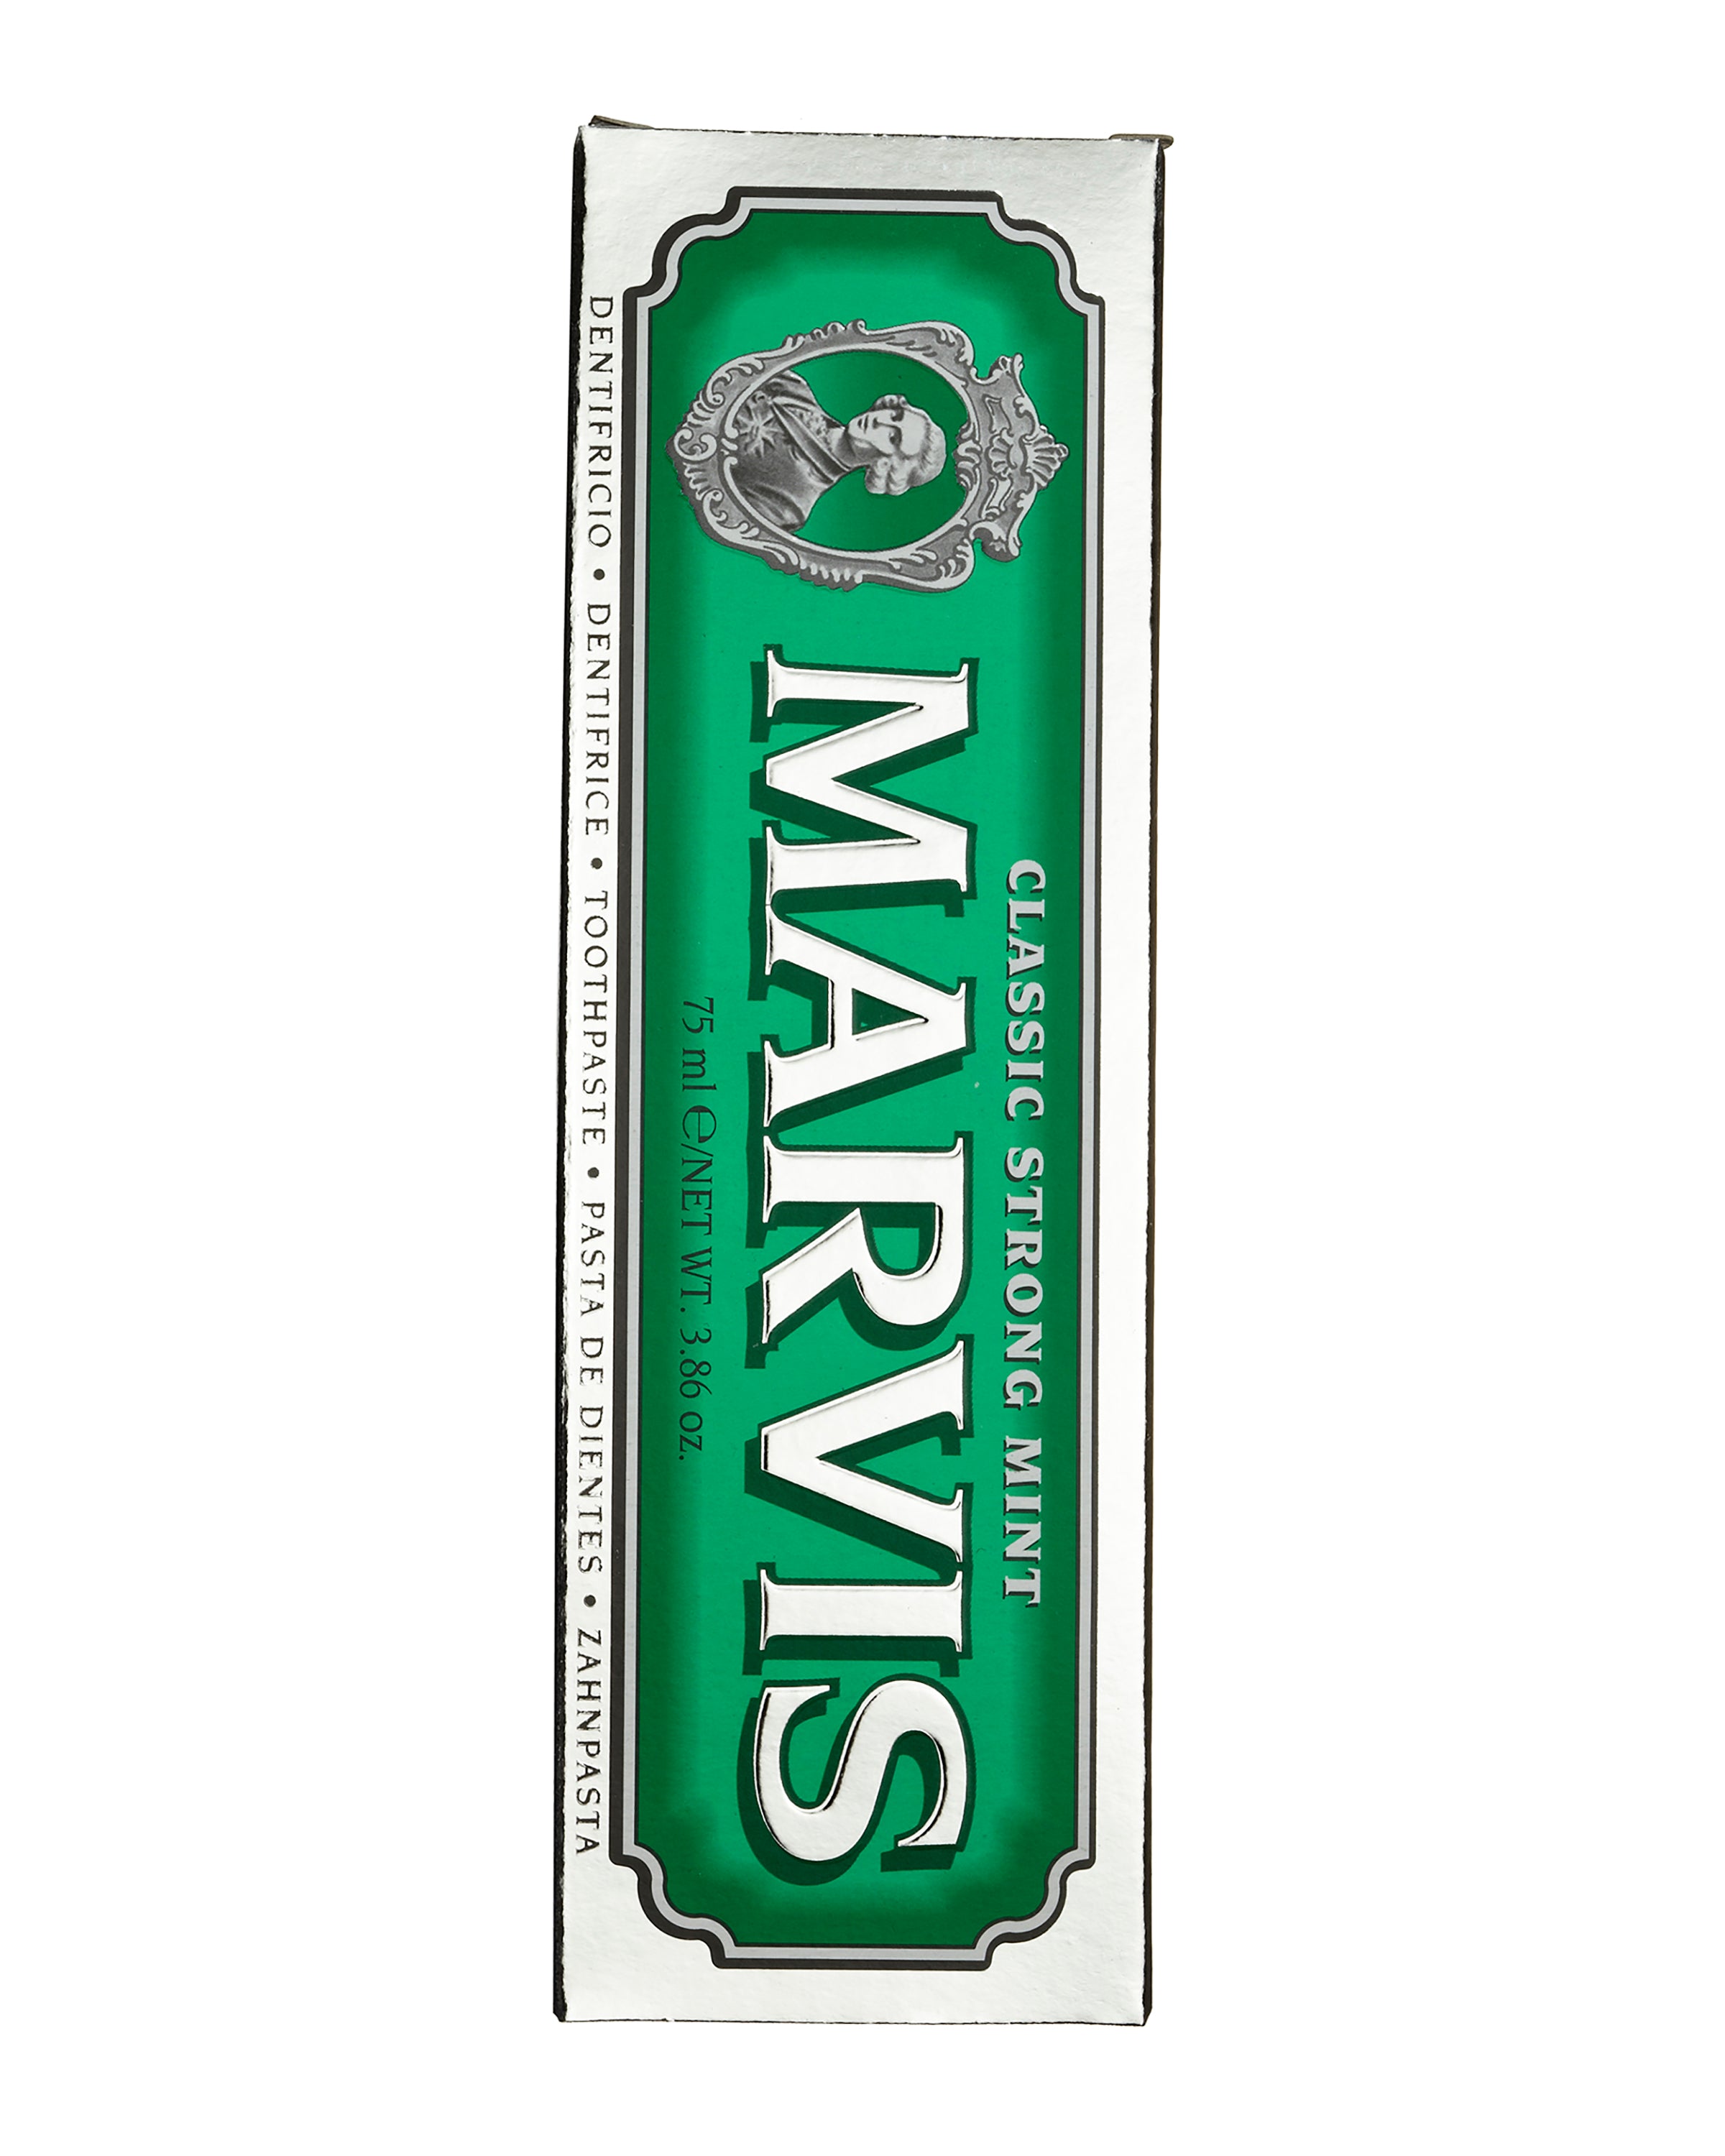 Marvis Classic Strong Mint Toothpaste - Shop The Standard